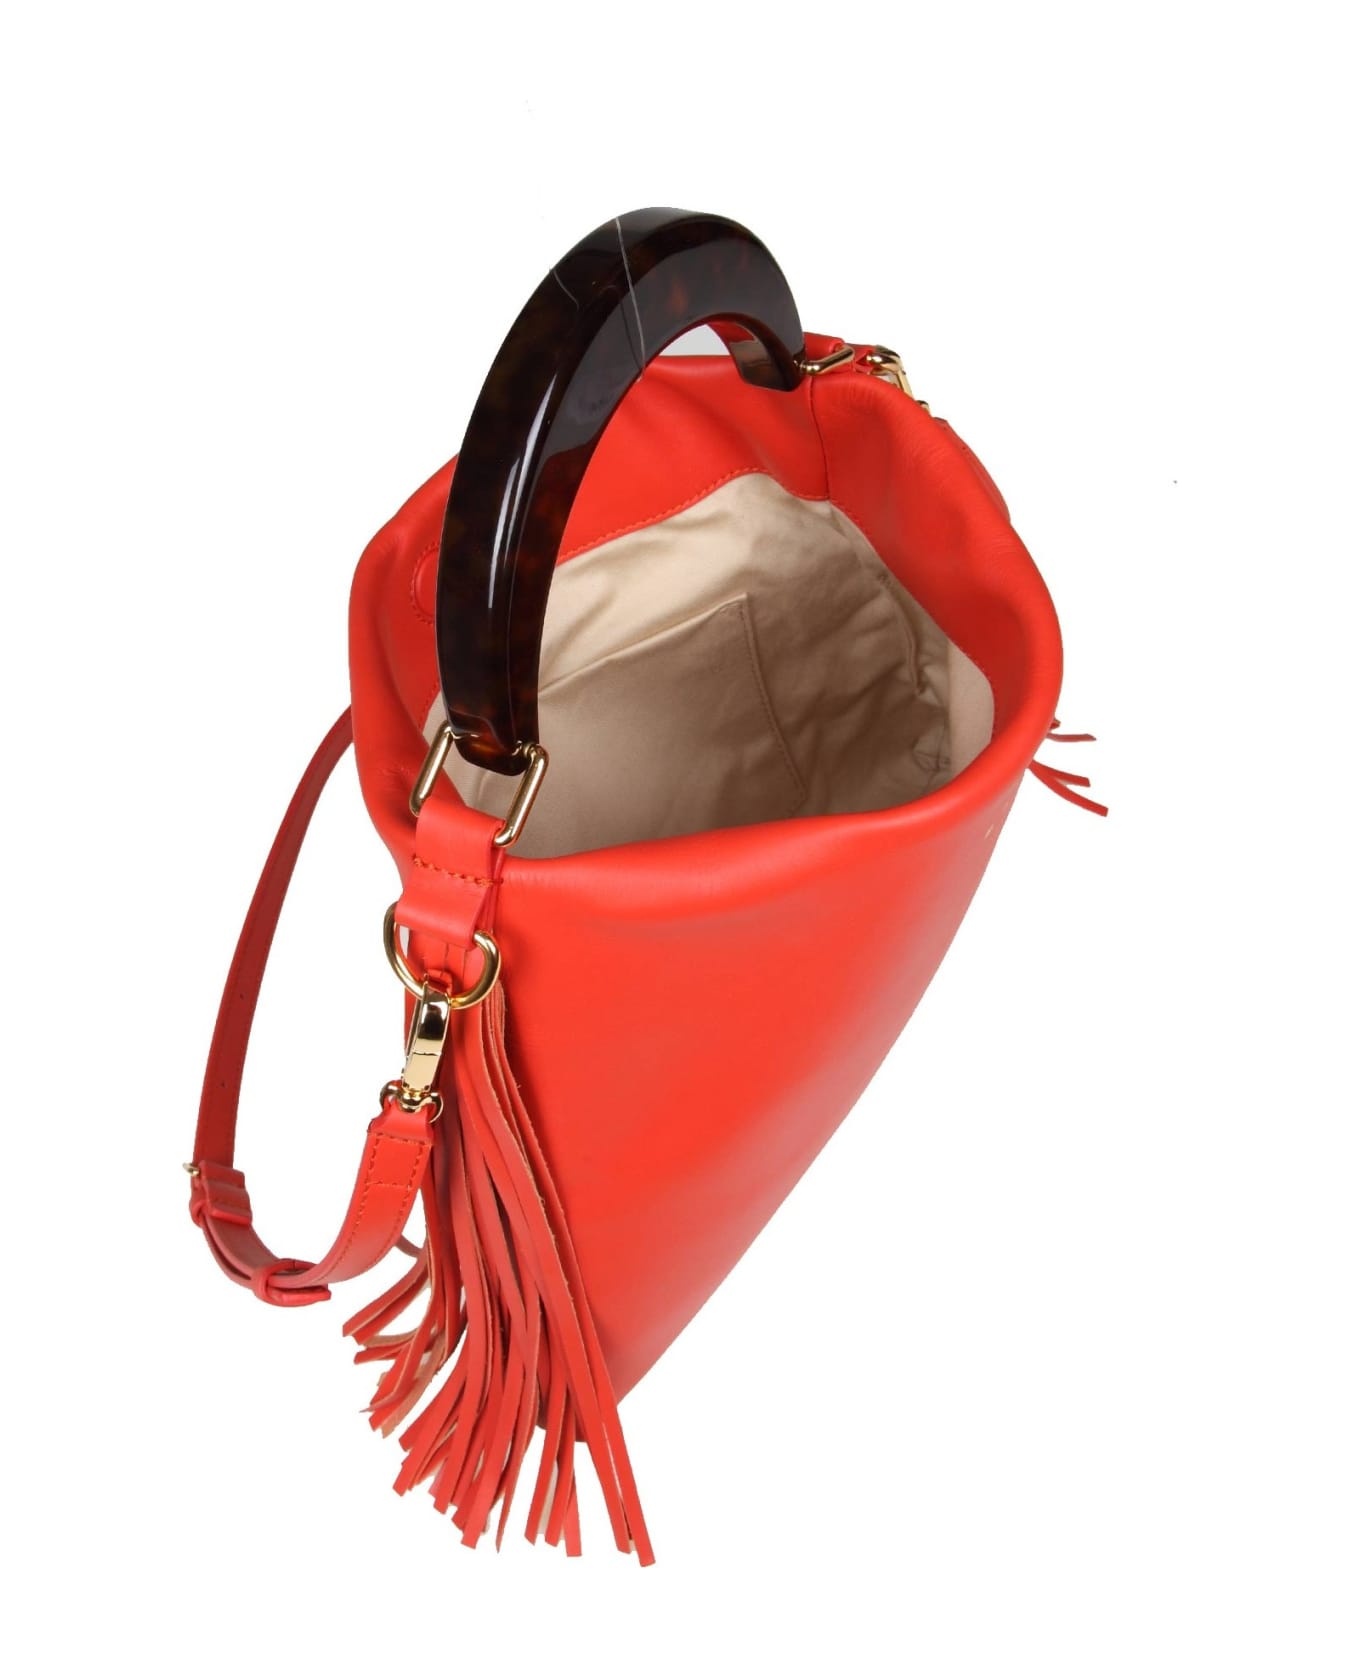 Marni Venice Small Bag With Leather Fringes - Coral